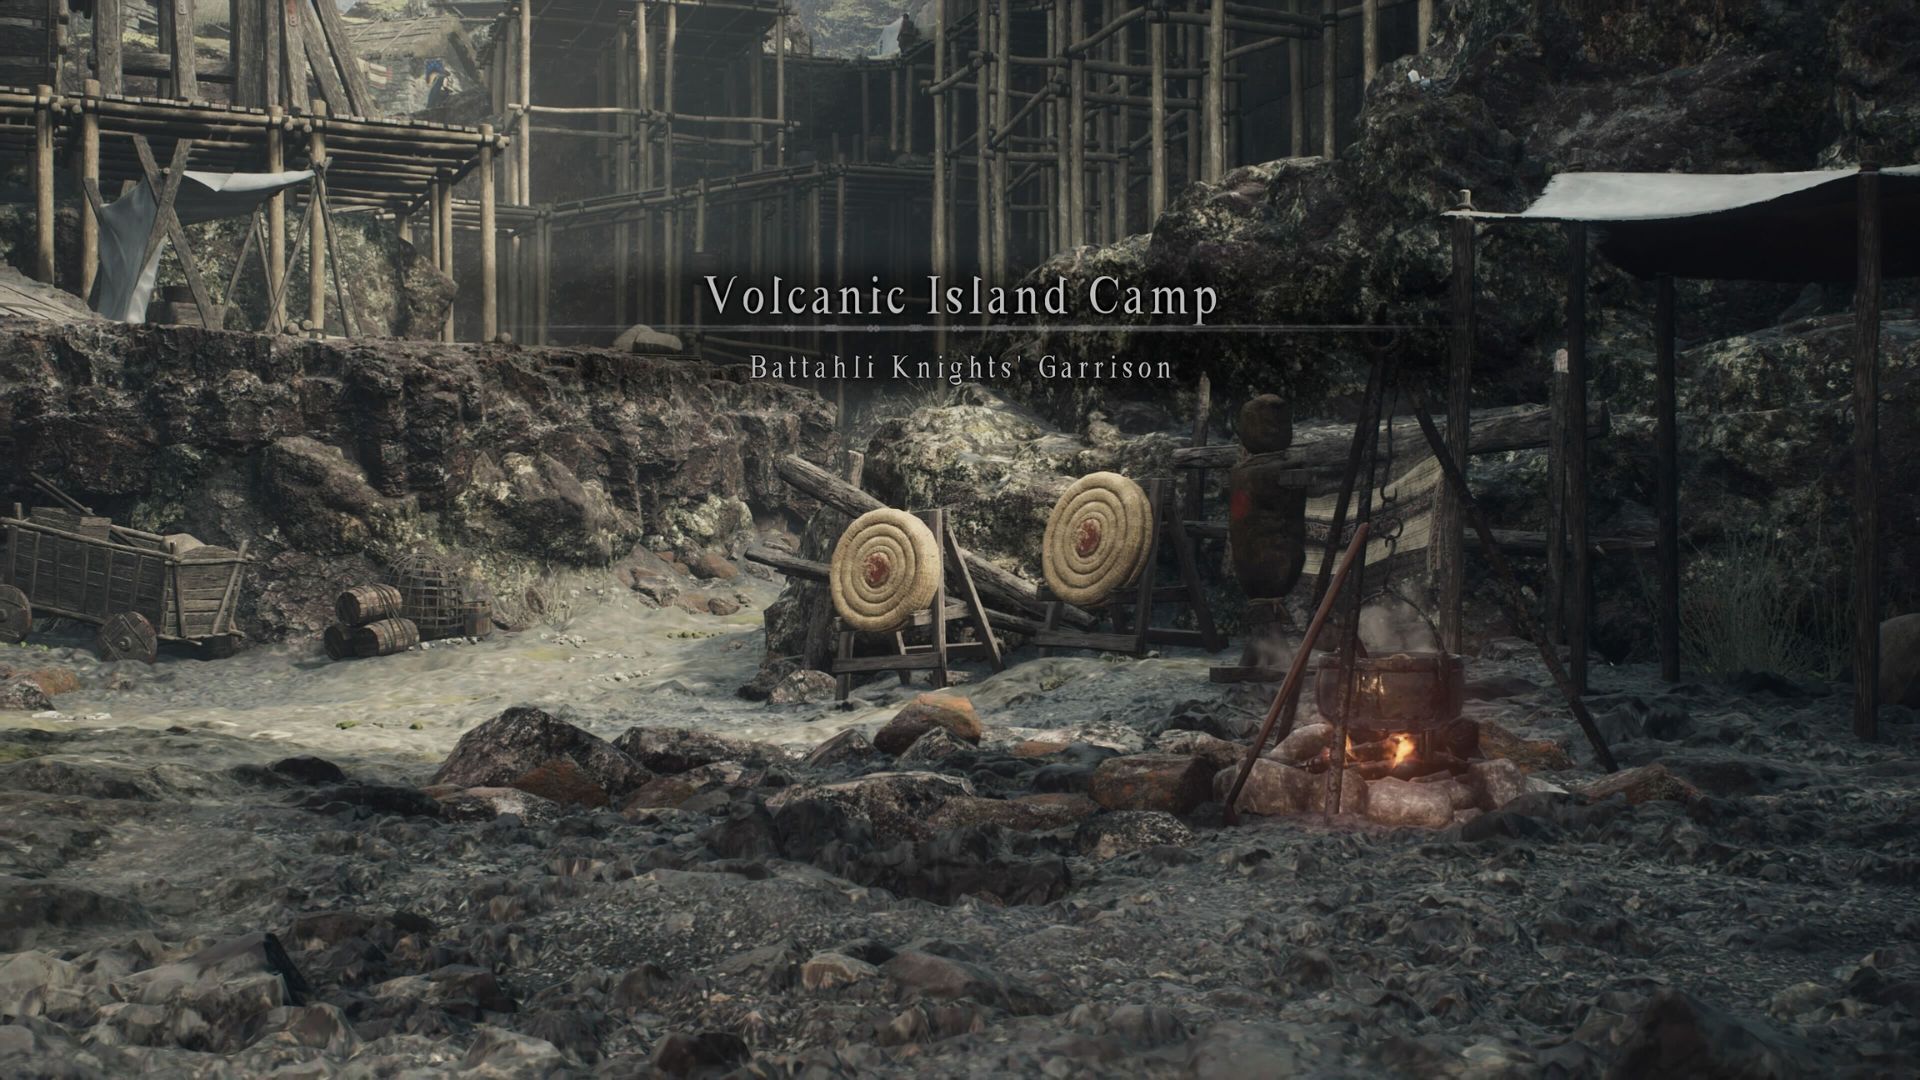 The Volcanic Island Camp settlement from Dragon's Dogma 2